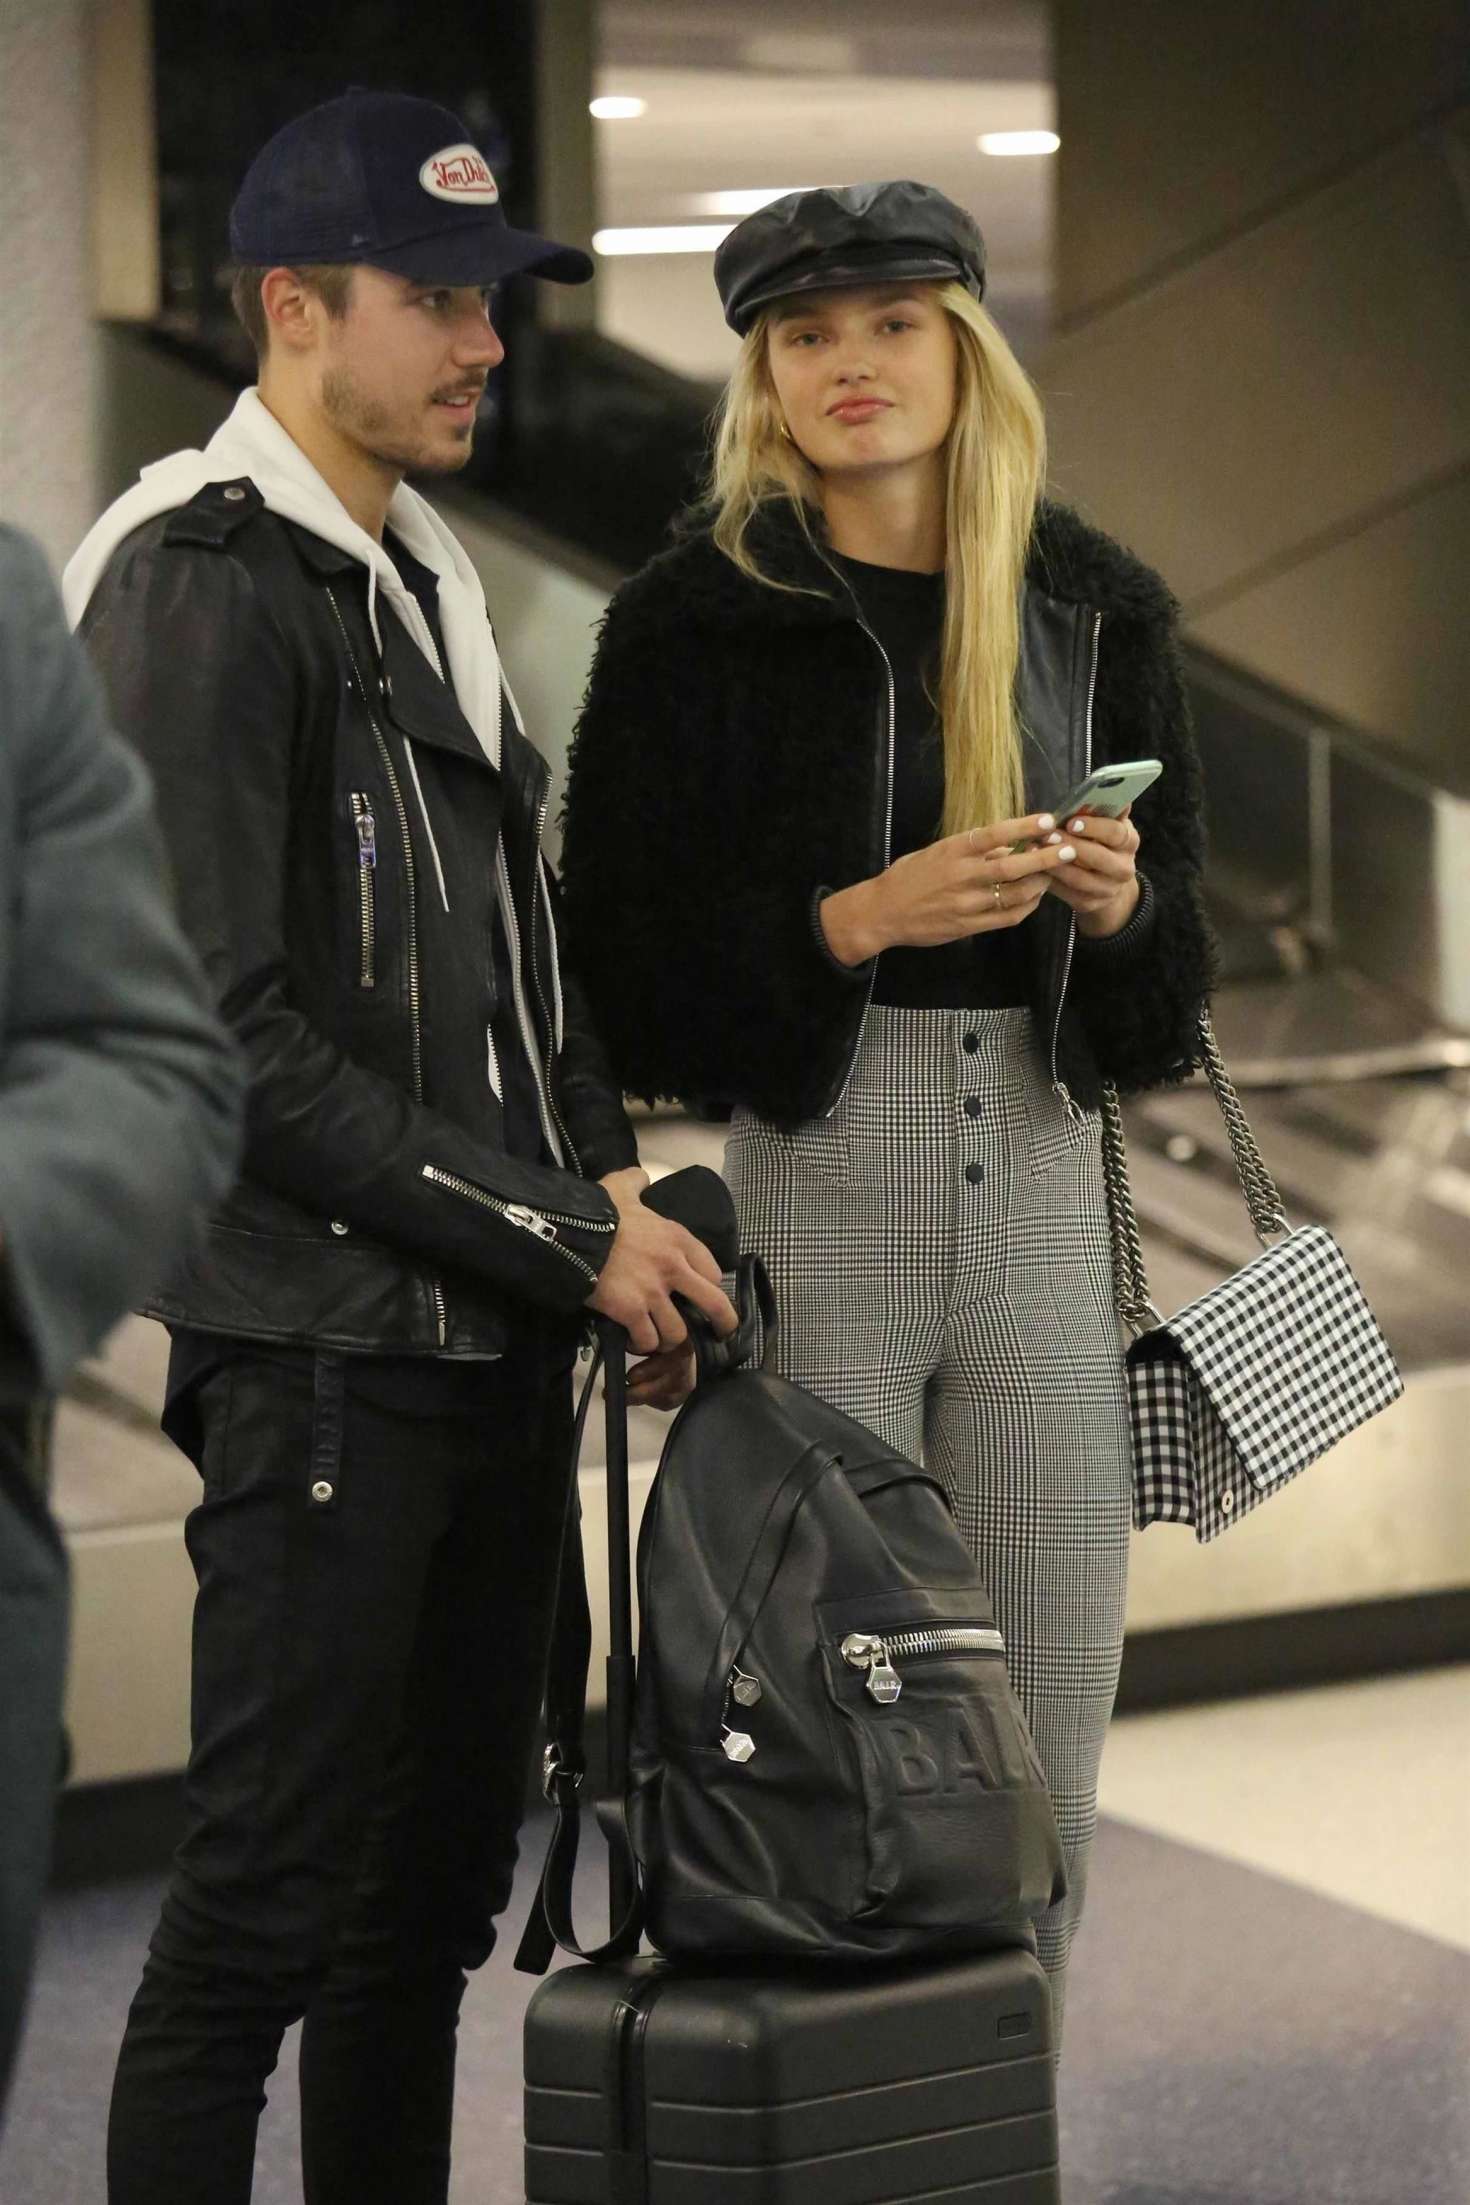 Romee Strijd at LAX International Airport in Los Angeles